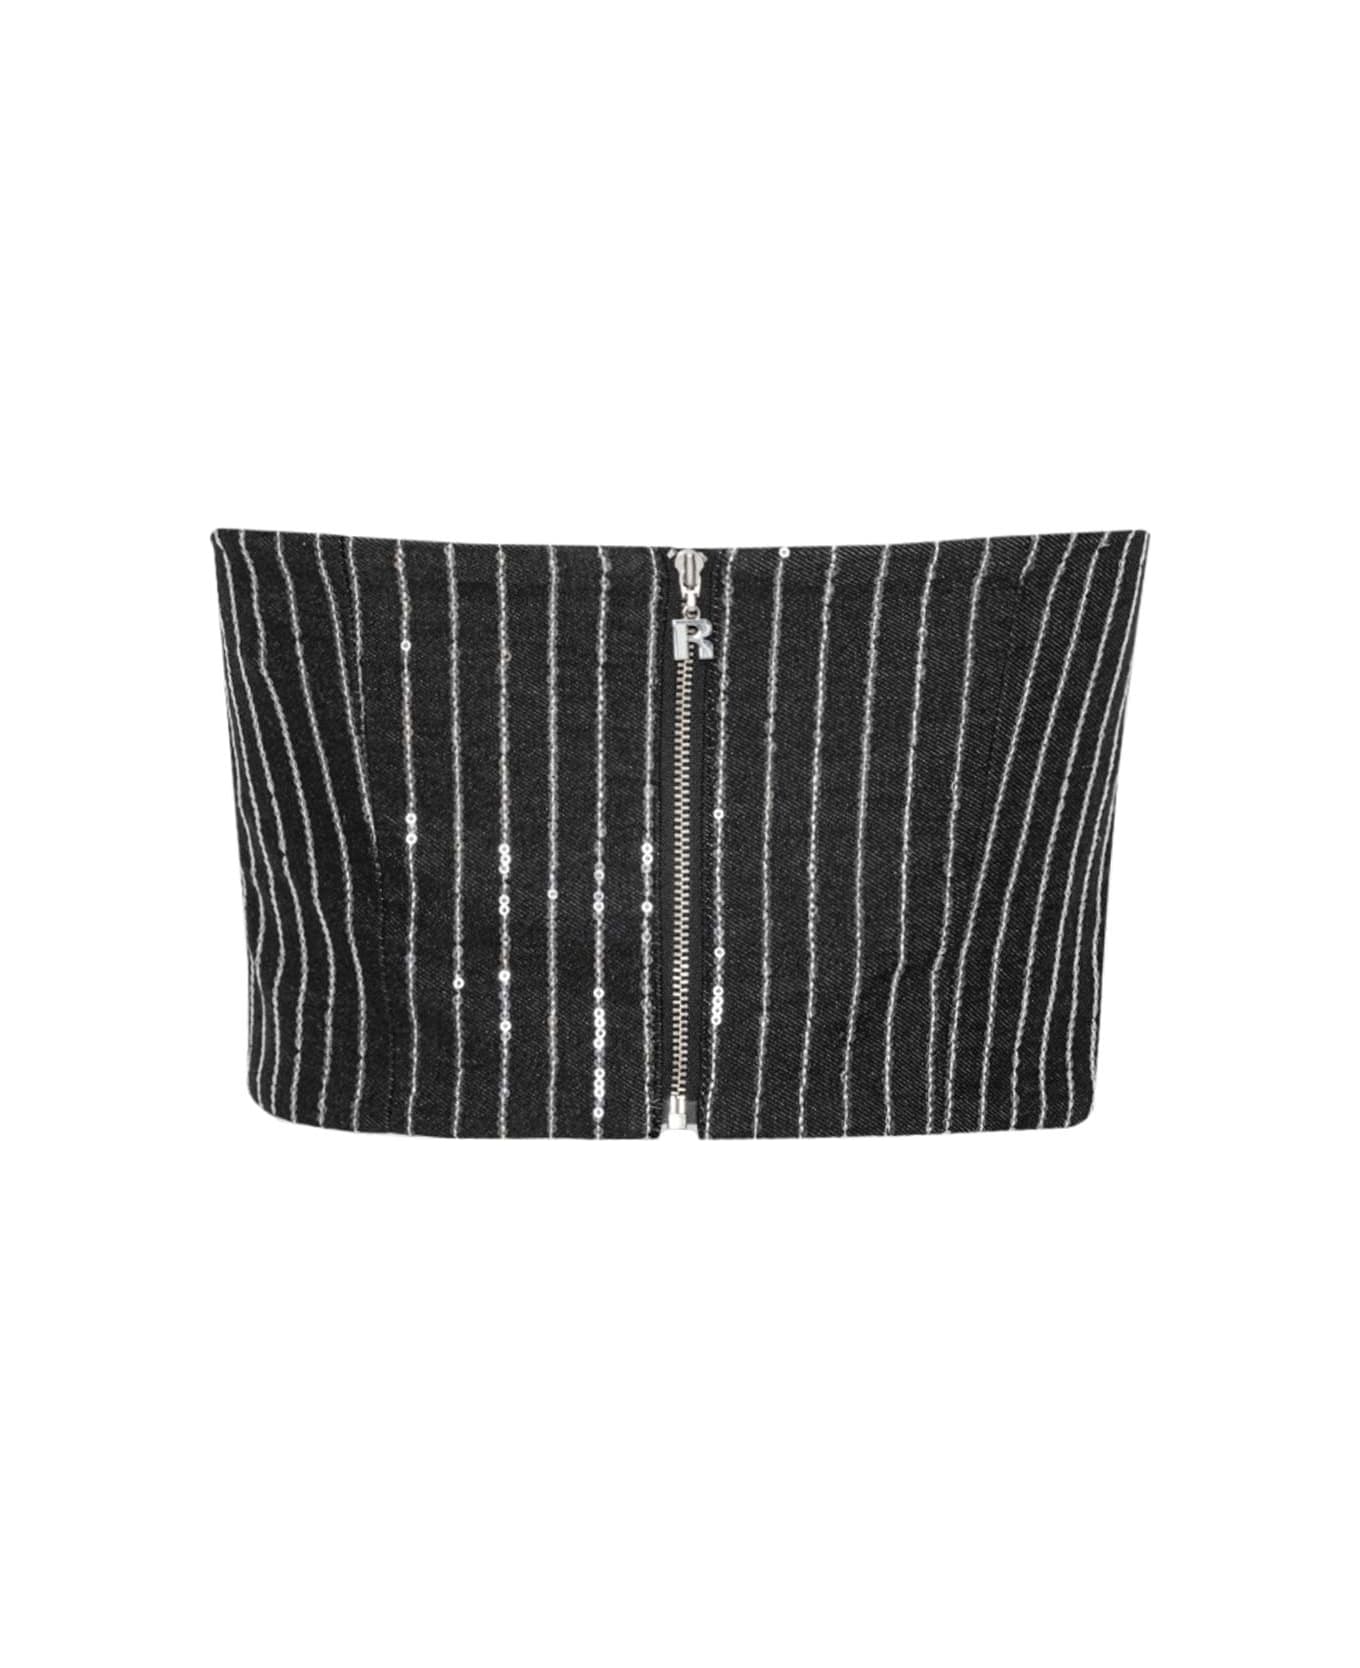 Rotate by Birger Christensen Crop Top With Sequins - Black トップス